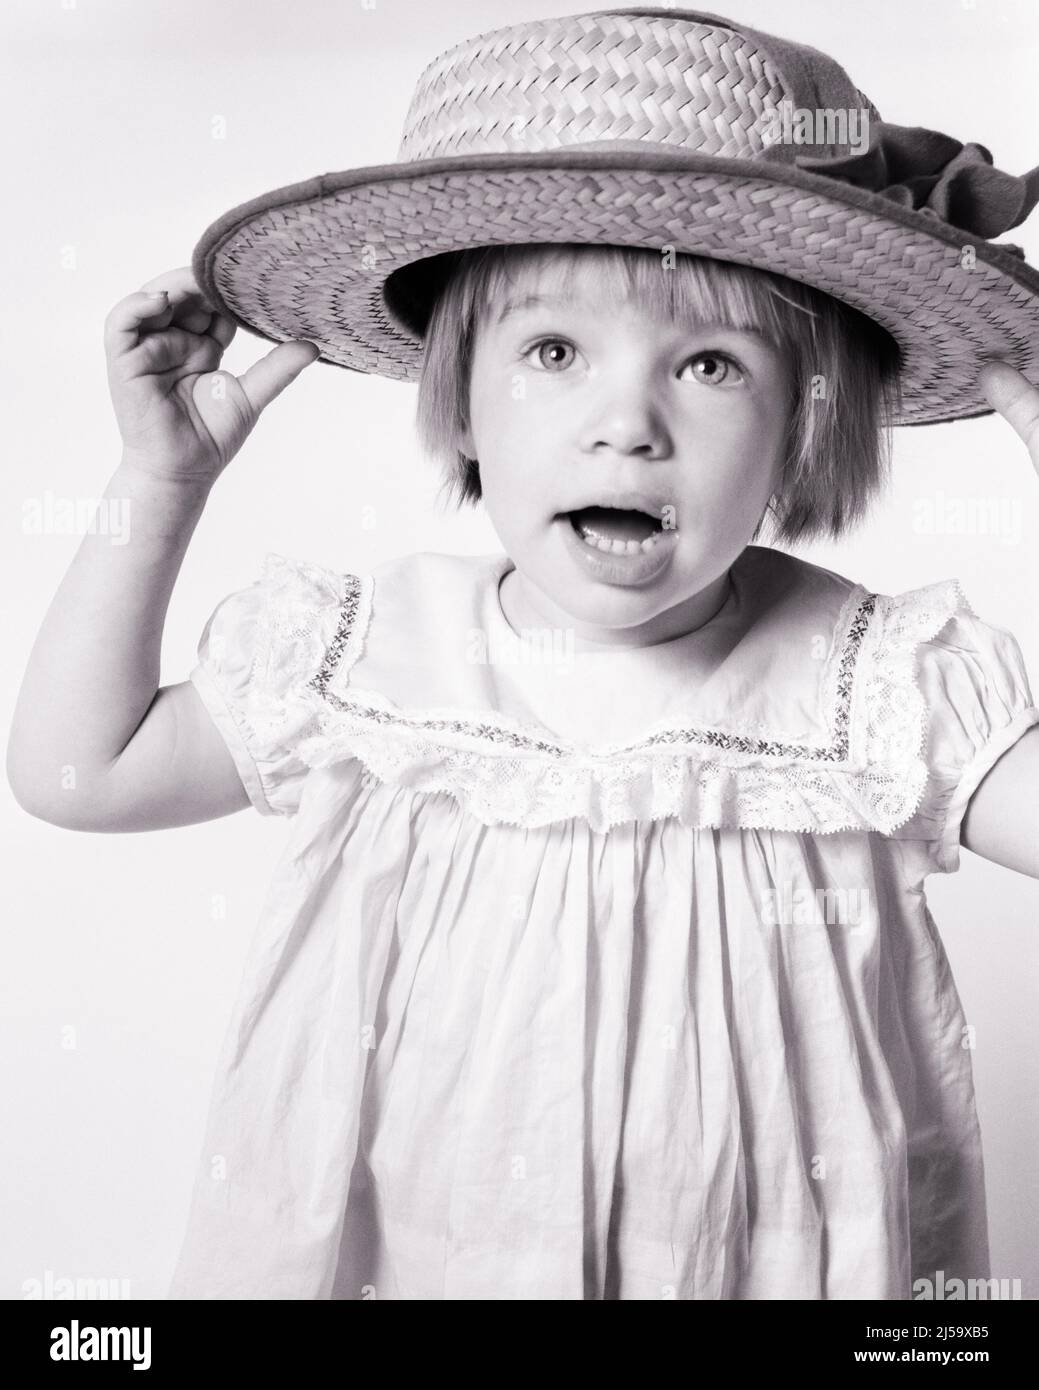 1960s CUTE LITTLE GIRL TODDLER HOLDING A TOO BIG STRAW HAT ON HER HEAD LOOKING AT CAMERA - j13195 HAR001 HARS STUDIO SHOT COPY SPACE EXPRESSIONS B&W EYE CONTACT WONDER HAPPINESS HEAD AND SHOULDERS DRESS UP STYLISH PLEASANT AGREEABLE CHARMING GROWTH JUVENILES LOVABLE PLEASING ADORABLE APPEALING BABY GIRL BLACK AND WHITE CAUCASIAN ETHNICITY HAR001 OLD FASHIONED Stock Photo